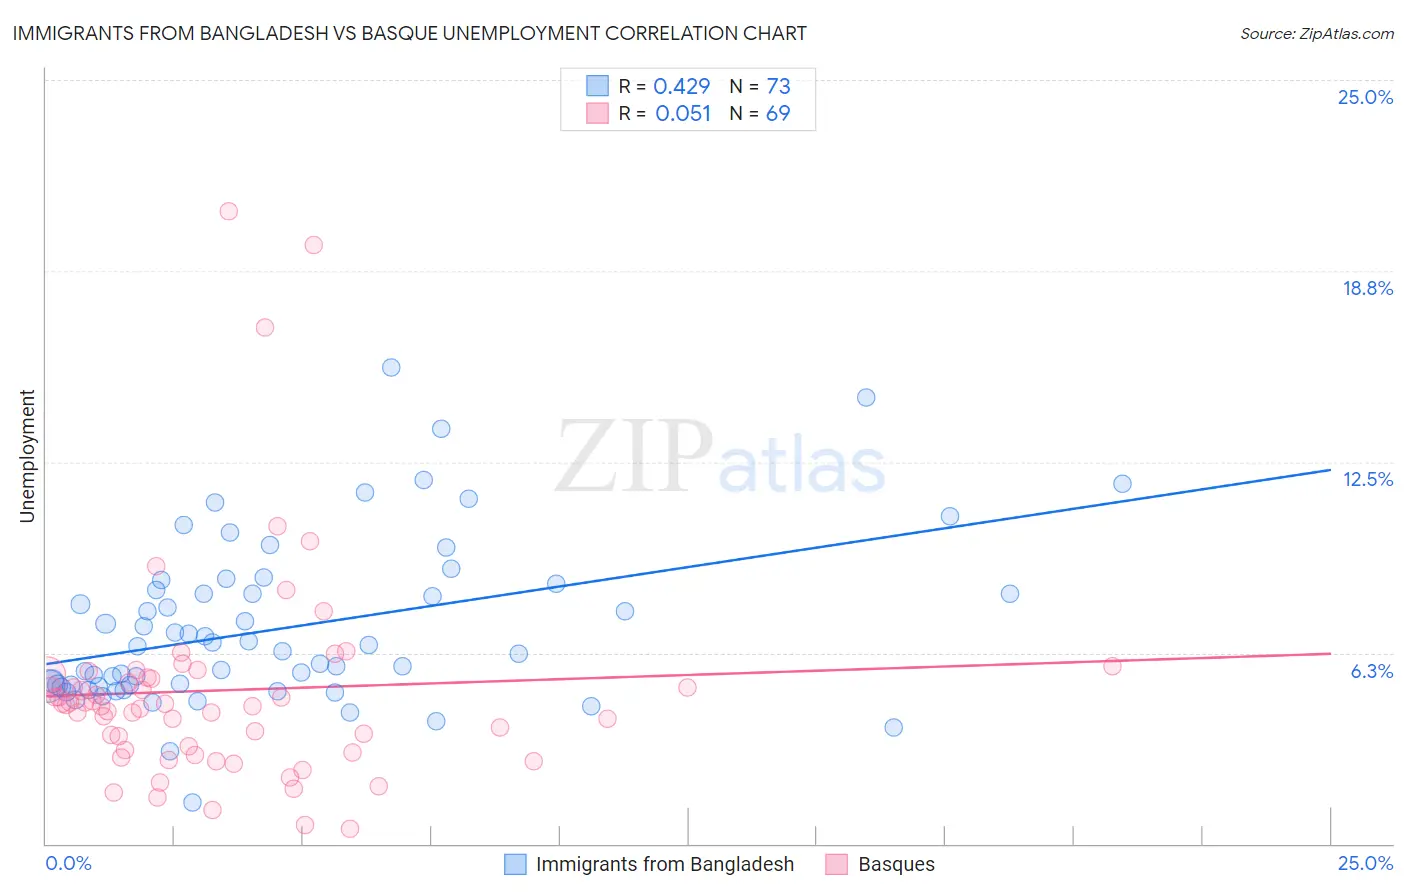 Immigrants from Bangladesh vs Basque Unemployment